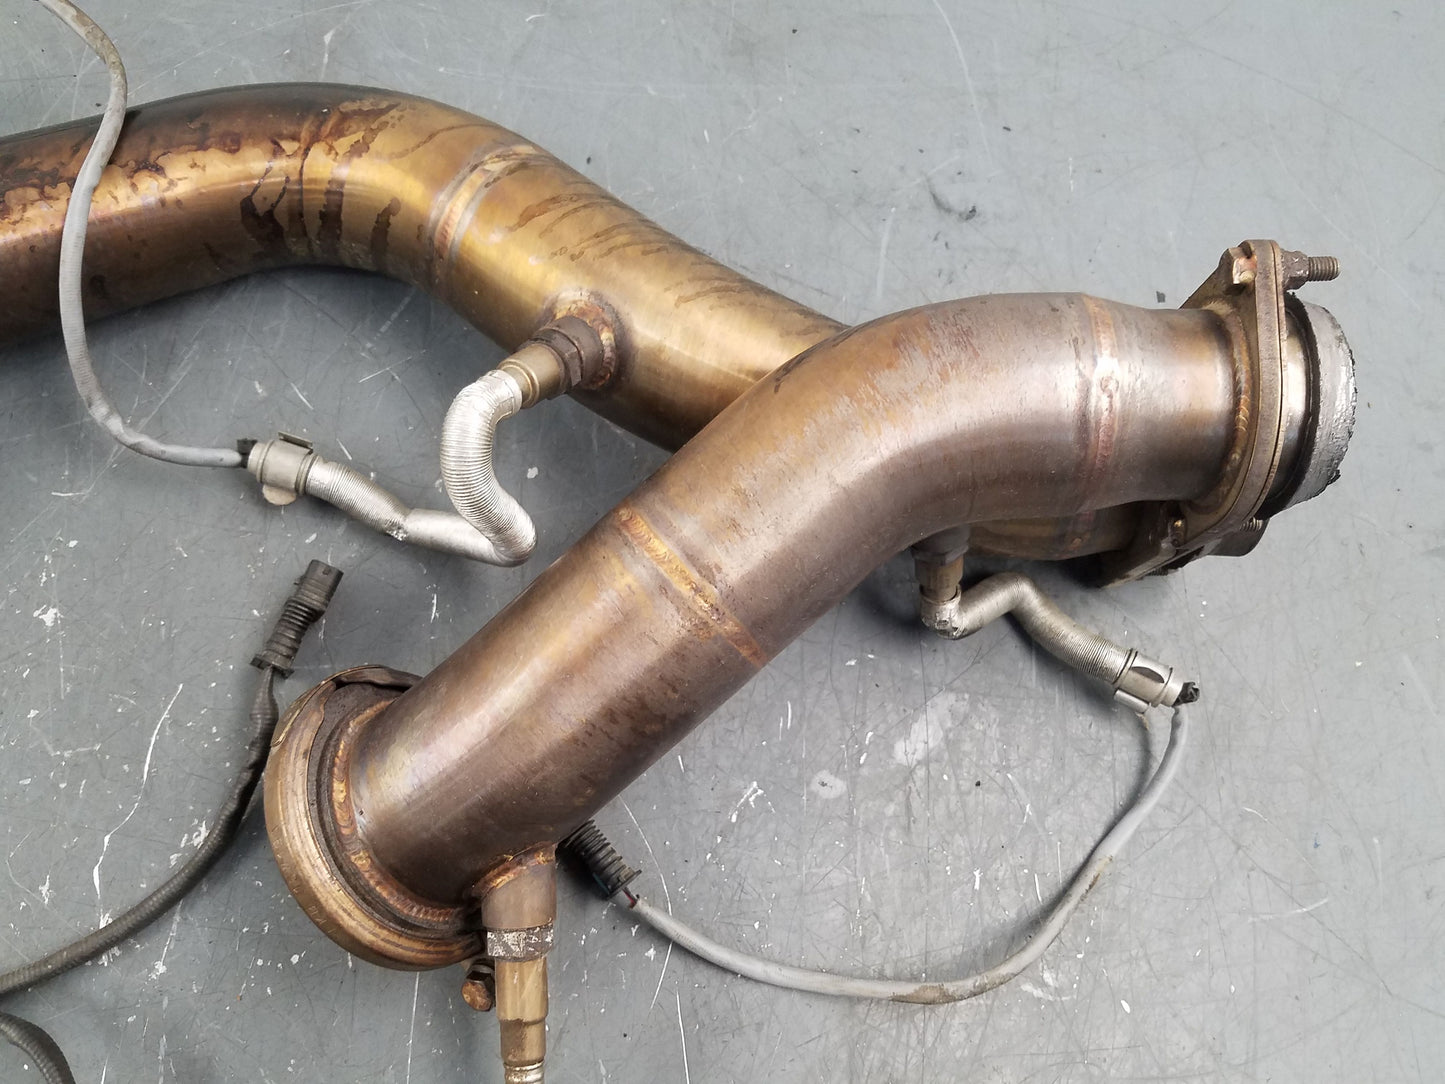 2017 BMW M4 F82 CATless Downpipes #9136 A6